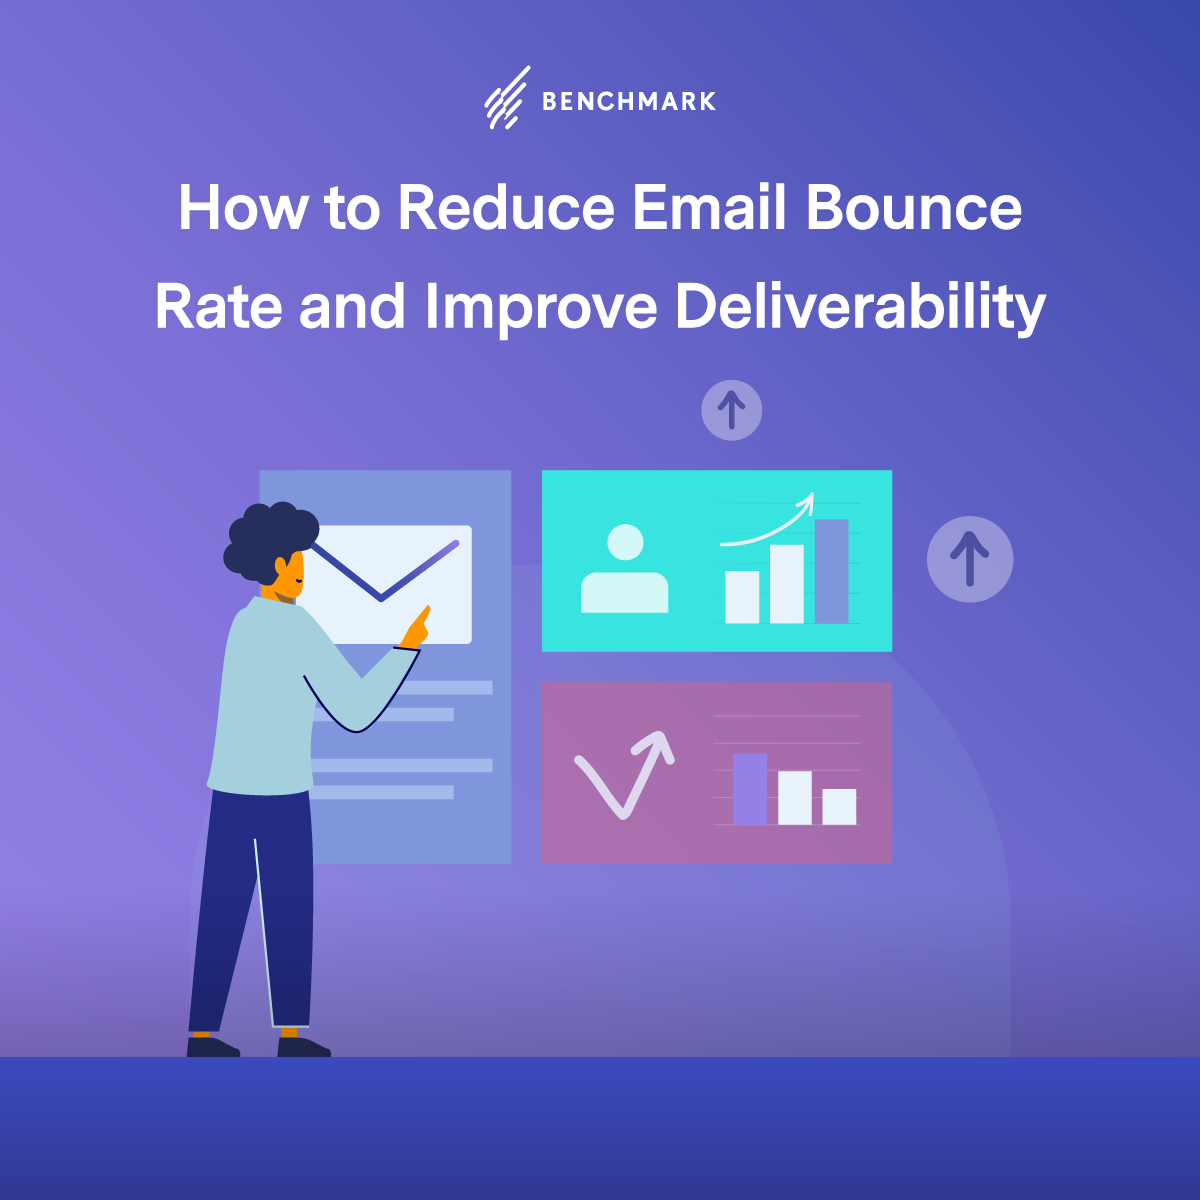 How To Reduce Email Bounce Rate And Improve Deliverability